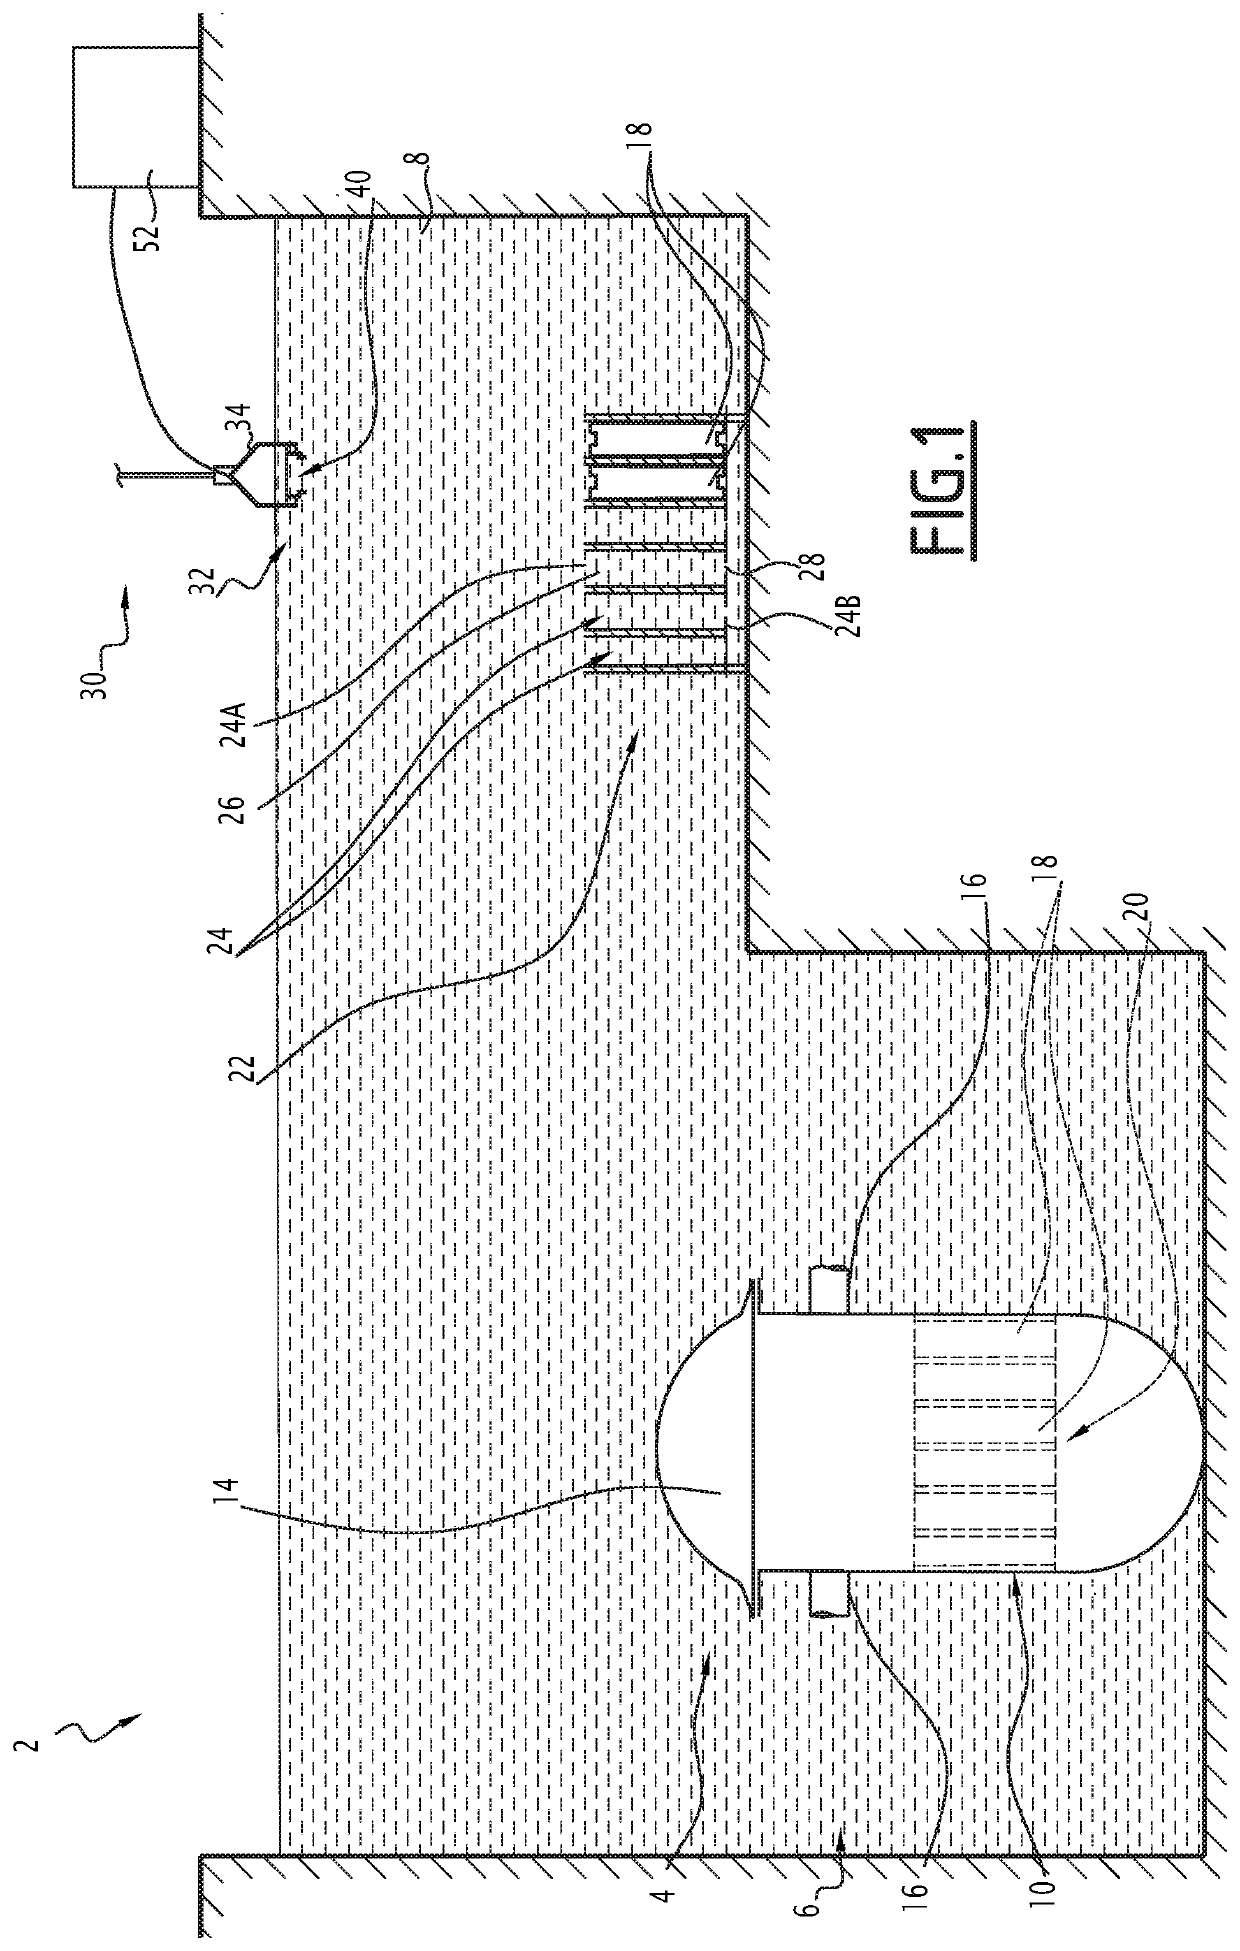 Device and method for seal verification by penetrant inspection of a nuclear fuel assembly